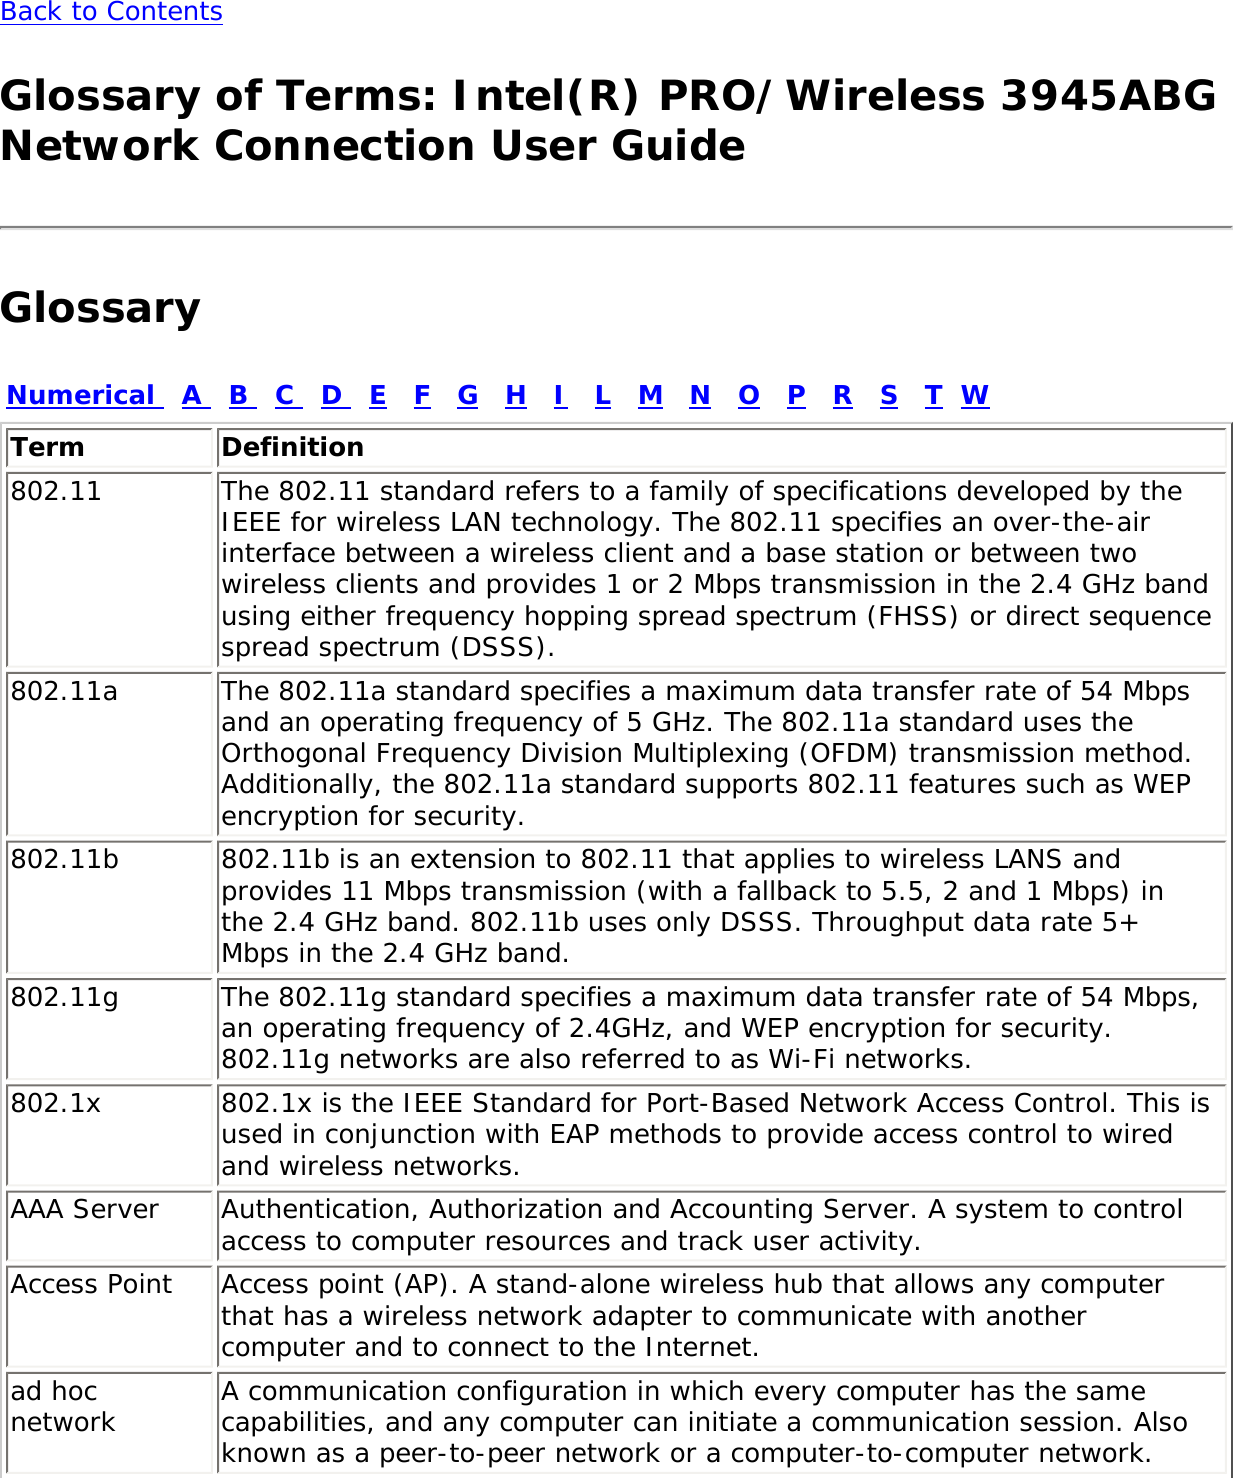 Back to Contents Glossary of Terms: Intel(R) PRO/Wireless 3945ABG Network Connection User GuideGlossaryNumerical   A   B   C   D   E   F   G   H   I   L   M   N   O   P   R   S   T  WTerm Definition802.11 The 802.11 standard refers to a family of specifications developed by the IEEE for wireless LAN technology. The 802.11 specifies an over-the-air interface between a wireless client and a base station or between two wireless clients and provides 1 or 2 Mbps transmission in the 2.4 GHz band using either frequency hopping spread spectrum (FHSS) or direct sequence spread spectrum (DSSS).802.11a The 802.11a standard specifies a maximum data transfer rate of 54 Mbps and an operating frequency of 5 GHz. The 802.11a standard uses the Orthogonal Frequency Division Multiplexing (OFDM) transmission method. Additionally, the 802.11a standard supports 802.11 features such as WEP encryption for security.802.11b 802.11b is an extension to 802.11 that applies to wireless LANS and provides 11 Mbps transmission (with a fallback to 5.5, 2 and 1 Mbps) in the 2.4 GHz band. 802.11b uses only DSSS. Throughput data rate 5+ Mbps in the 2.4 GHz band.802.11g The 802.11g standard specifies a maximum data transfer rate of 54 Mbps, an operating frequency of 2.4GHz, and WEP encryption for security. 802.11g networks are also referred to as Wi-Fi networks.802.1x 802.1x is the IEEE Standard for Port-Based Network Access Control. This is used in conjunction with EAP methods to provide access control to wired and wireless networks.AAA Server  Authentication, Authorization and Accounting Server. A system to control access to computer resources and track user activity.Access Point  Access point (AP). A stand-alone wireless hub that allows any computer that has a wireless network adapter to communicate with another computer and to connect to the Internet.ad hoc network A communication configuration in which every computer has the same capabilities, and any computer can initiate a communication session. Also known as a peer-to-peer network or a computer-to-computer network.